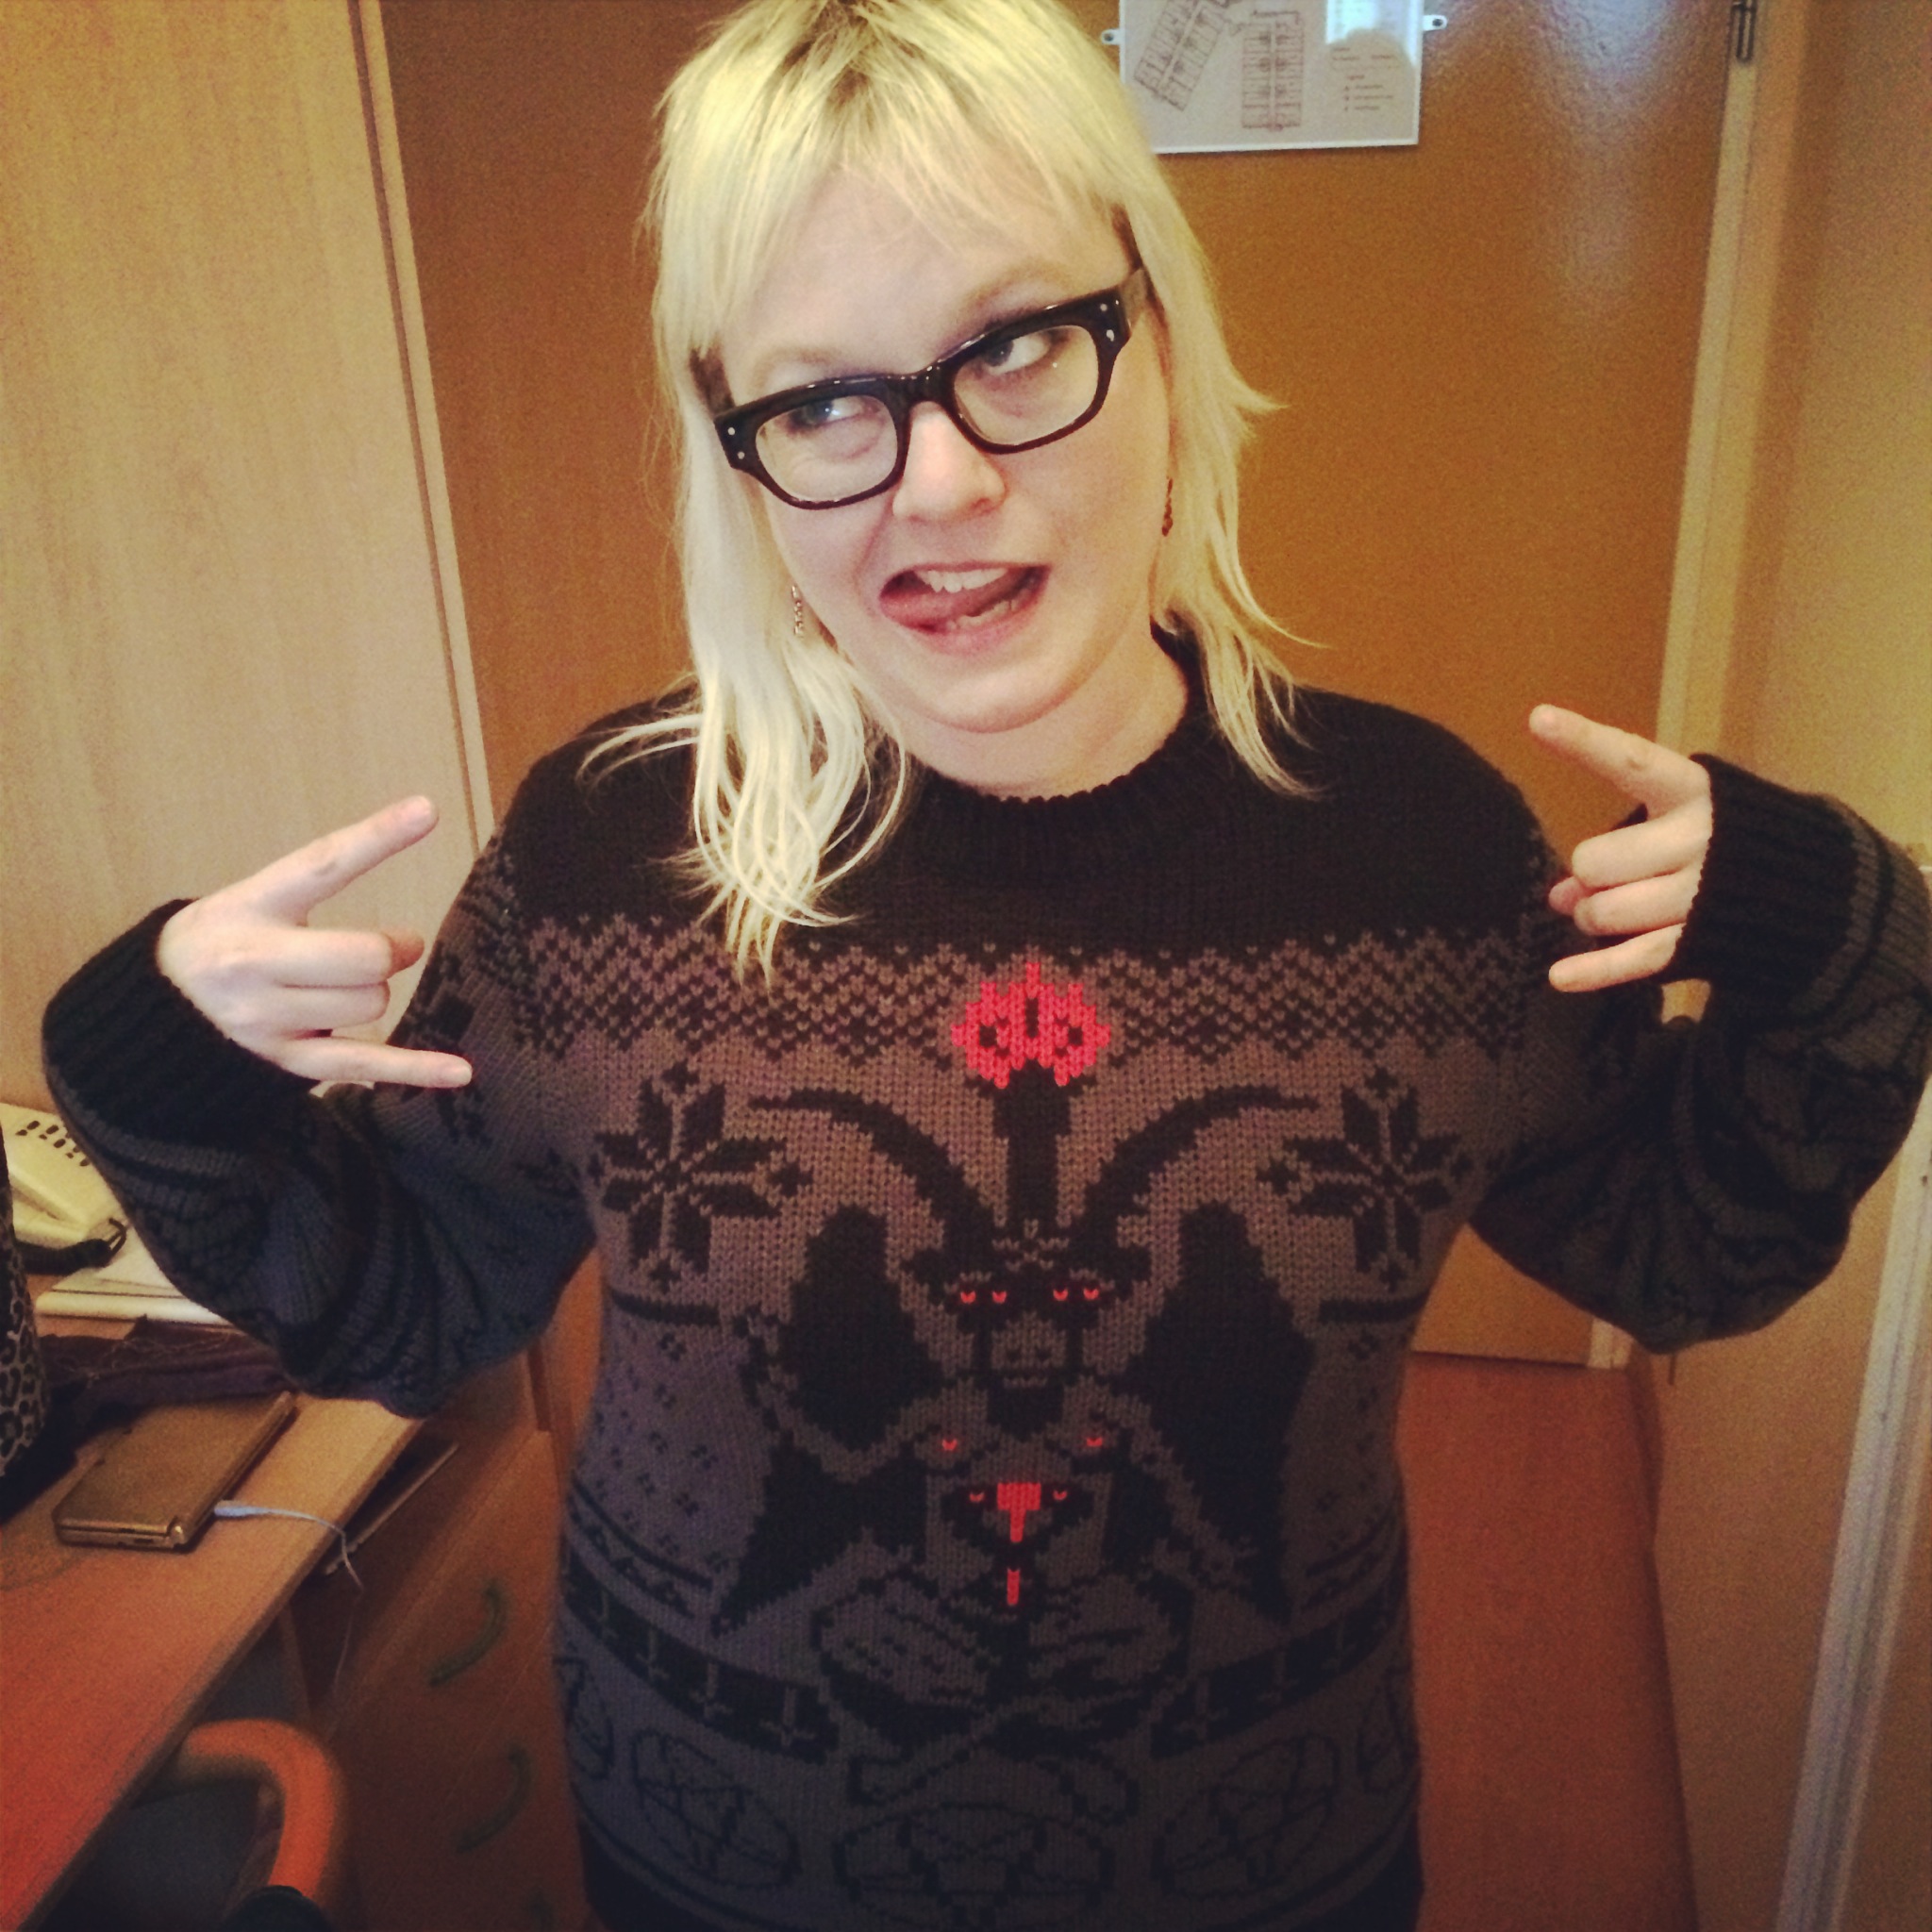 My Christmas sweater is the best Christmas sweater. I got it from Shredders Sweaters!